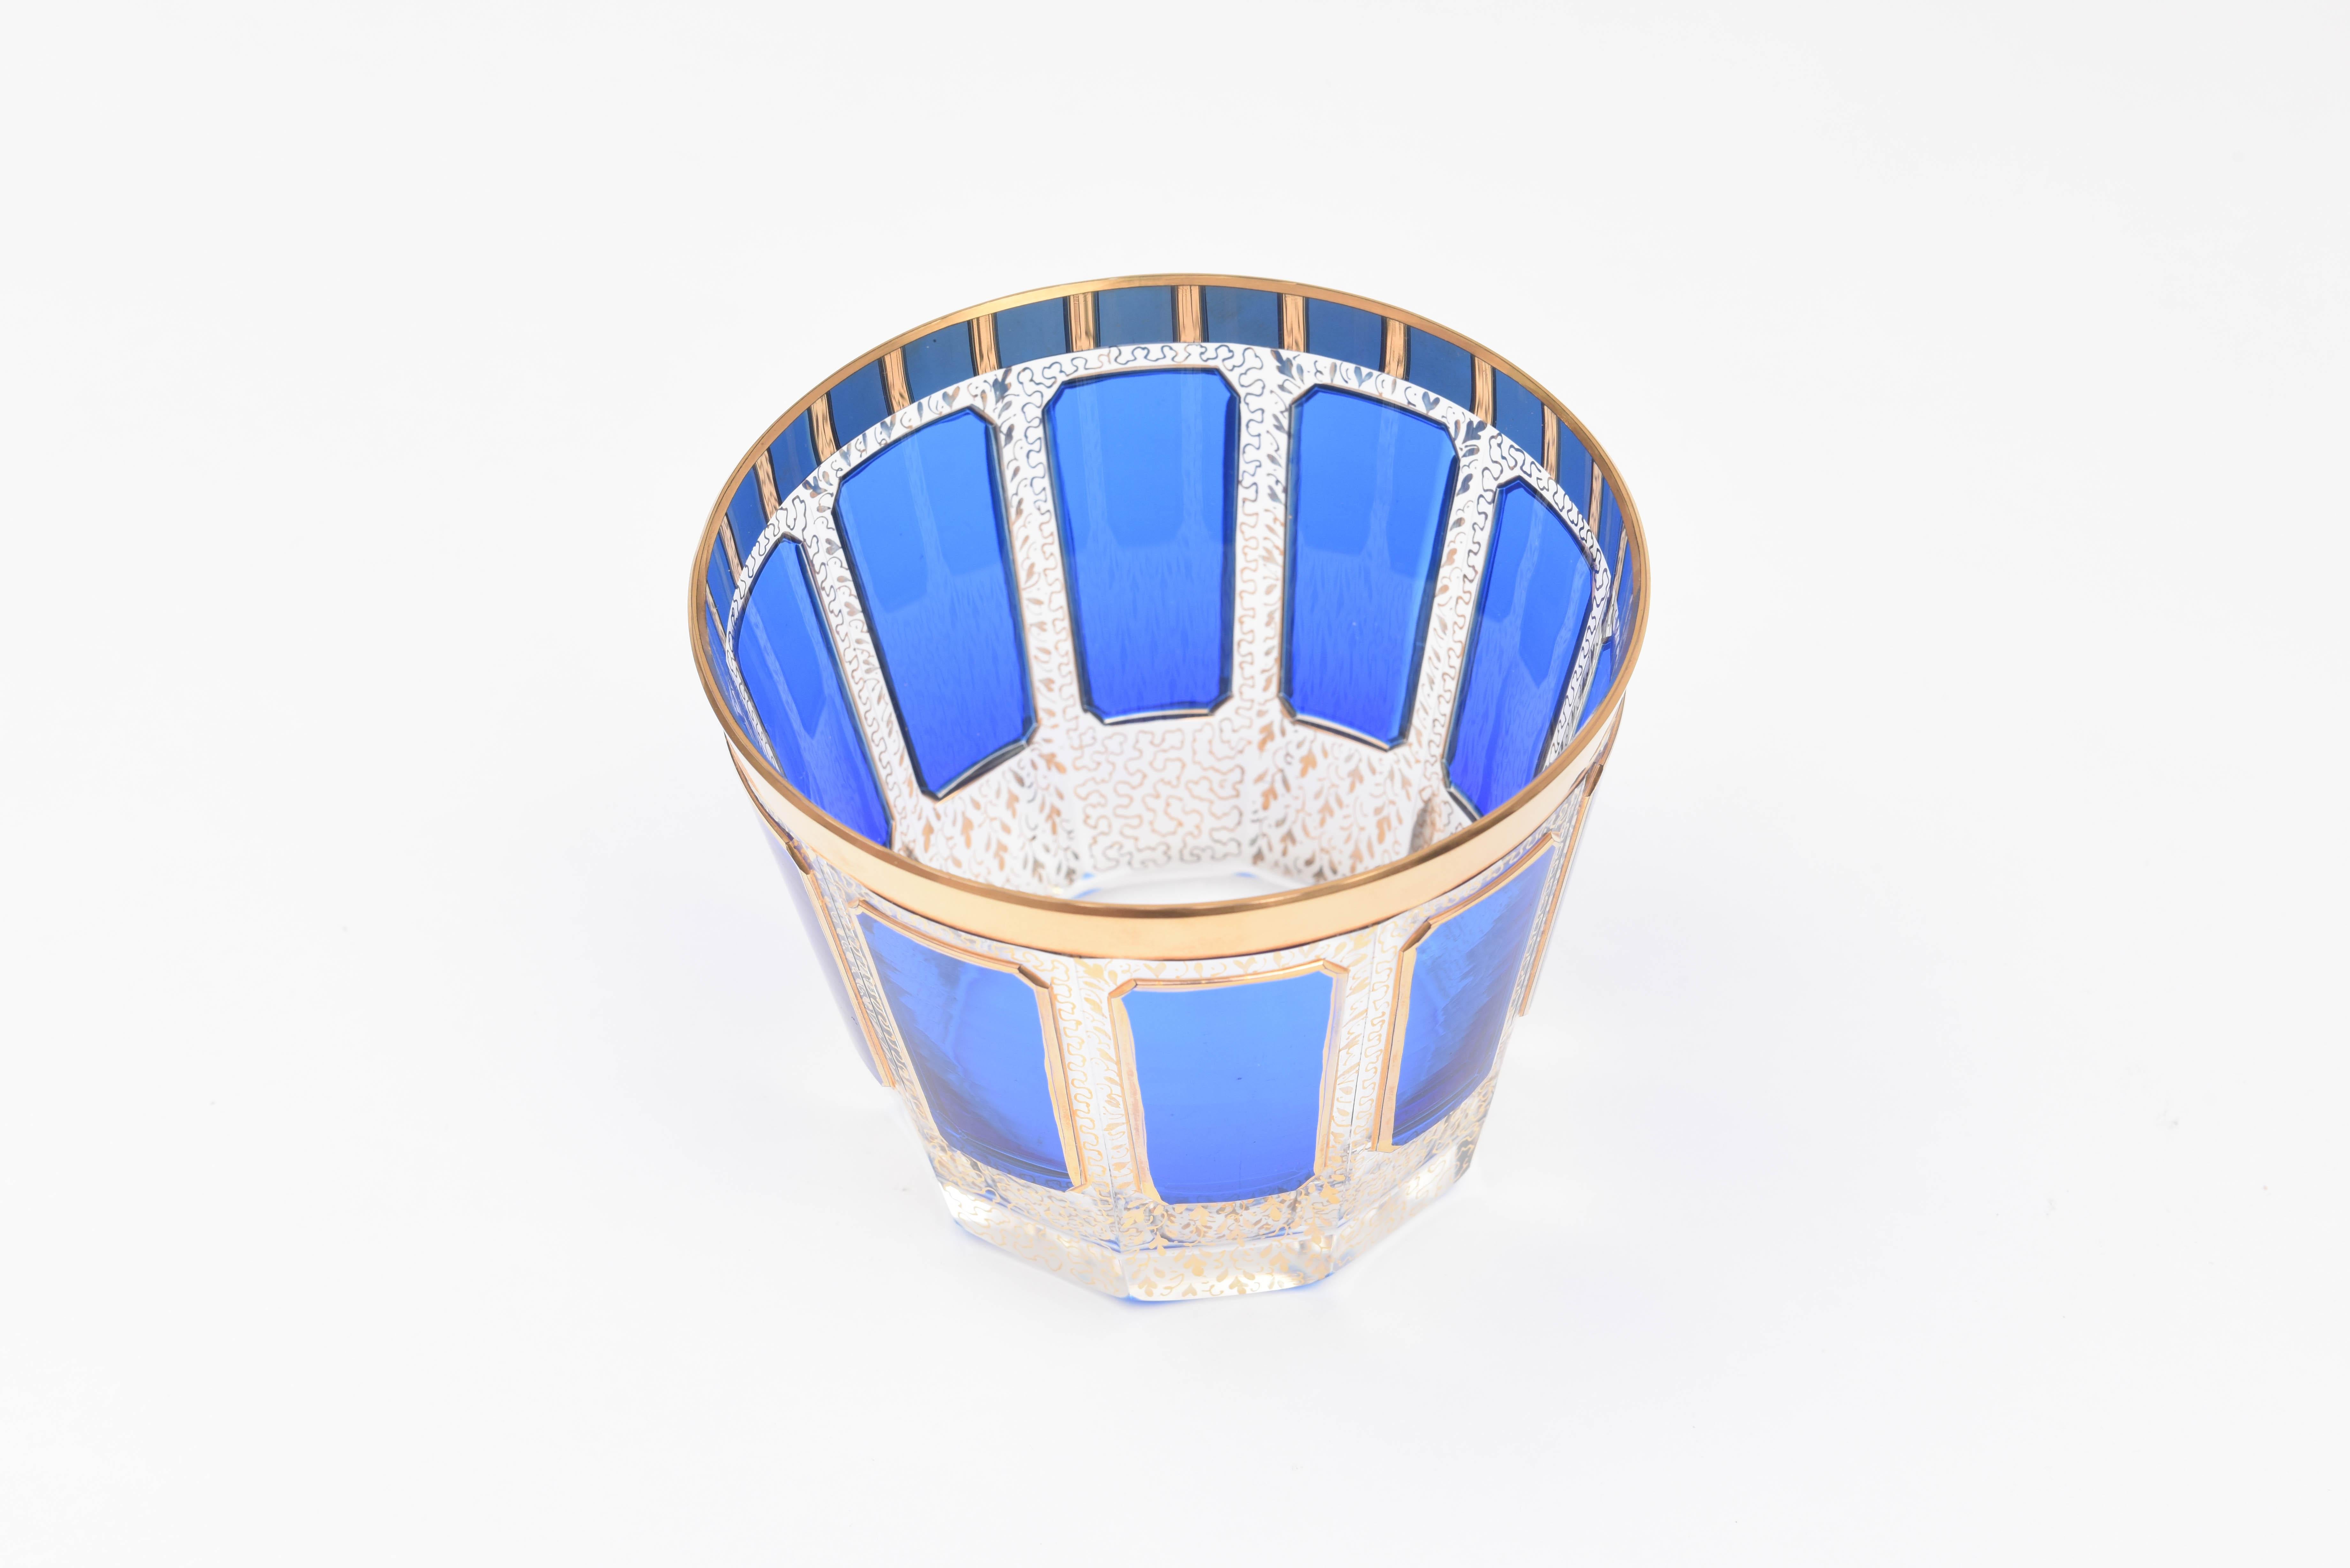 Czech Antique Crystal Ice Bucket, Moser or Moser Style Cobalt Panel Glass and Gold